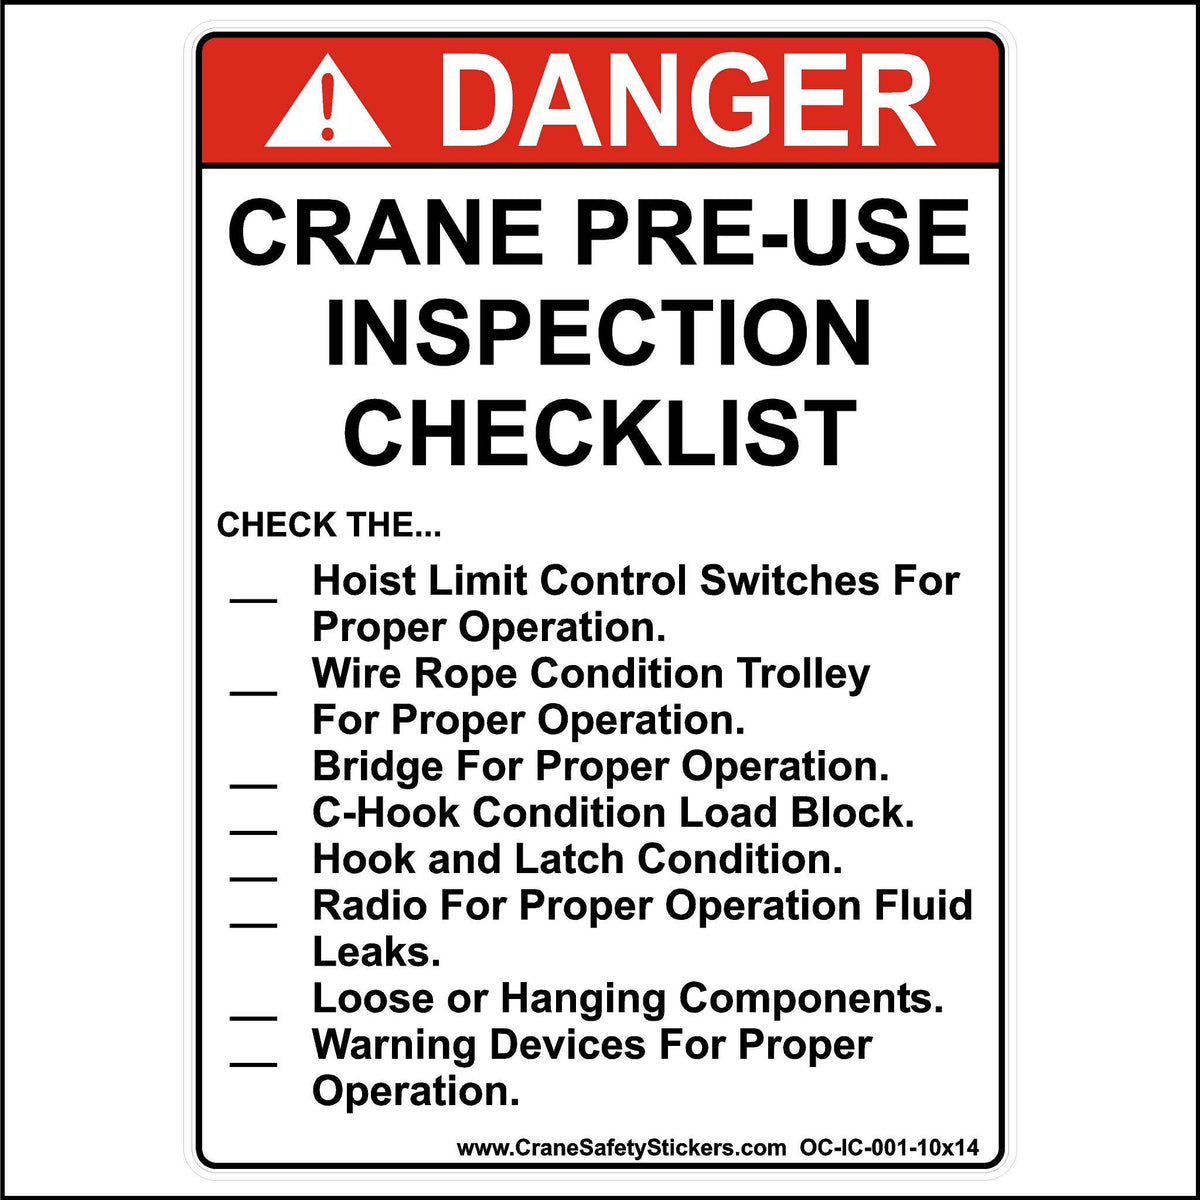 This crane pre-use inspection checklist sticker is printed in white and red with black lettering reading,  CRANE PRE-USE INSPECTION CHECKLIST CHECK THE... Hoist Limit Control Switches For Proper Operation. Wire Rope Condition Trolley For Proper Operation. Bridge For Proper Operation. C-Hook Condition Load Block. Hook and Latch Condition. Radio For Proper Operation Fluid Leaks. Loose or Hanging Components. Warning Devices For Proper Operation.